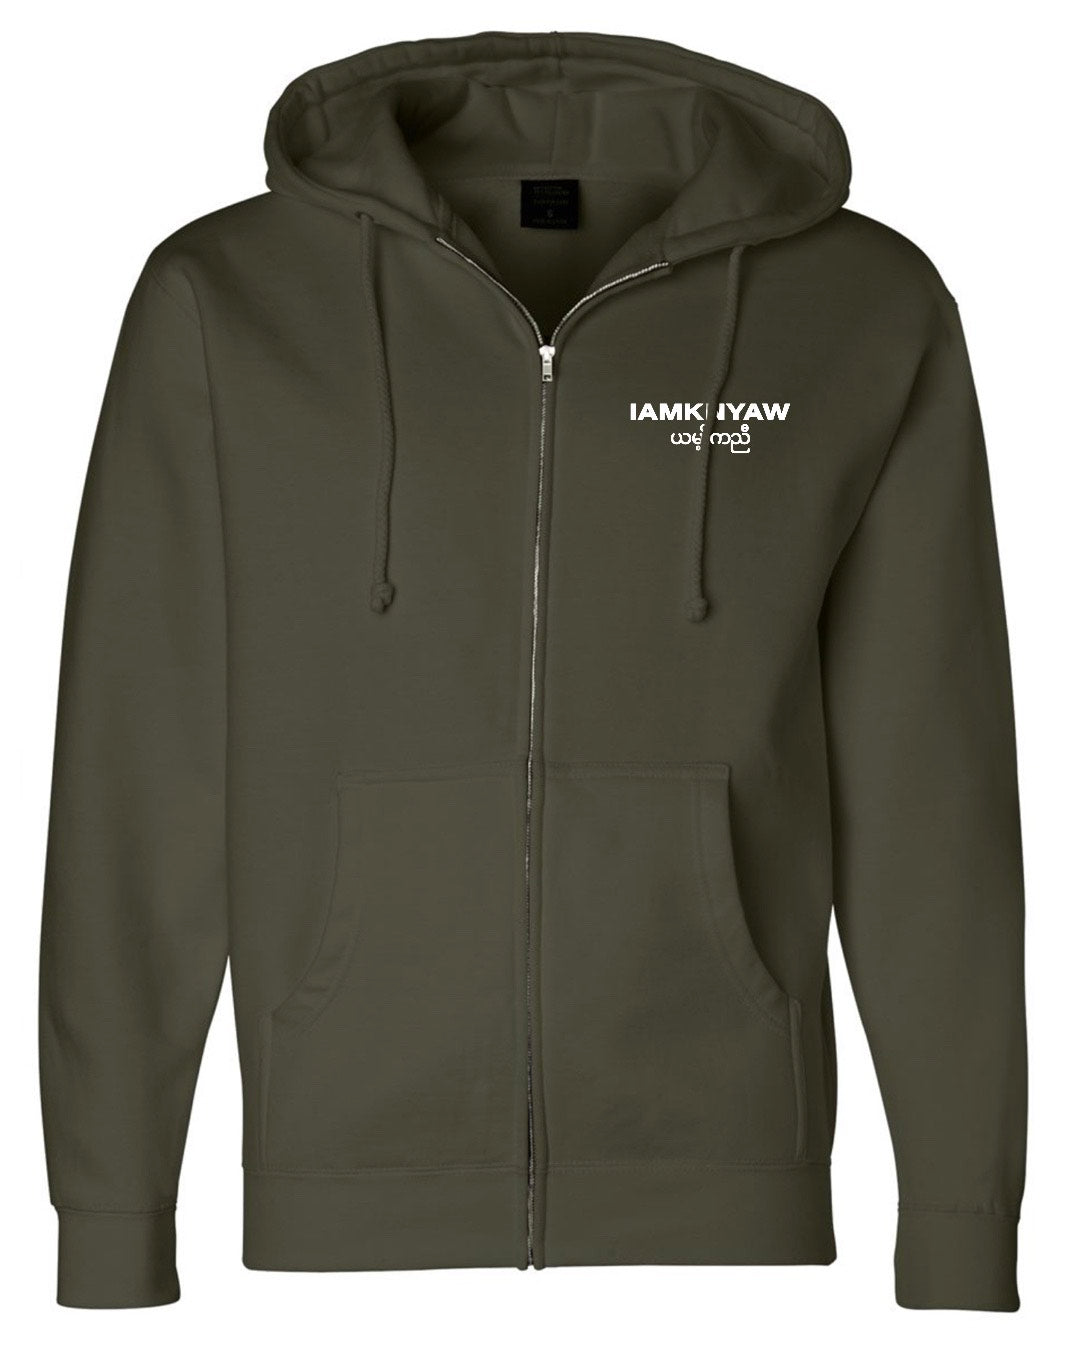 NEW! Limited Edition Full Zip Classic Hoodie